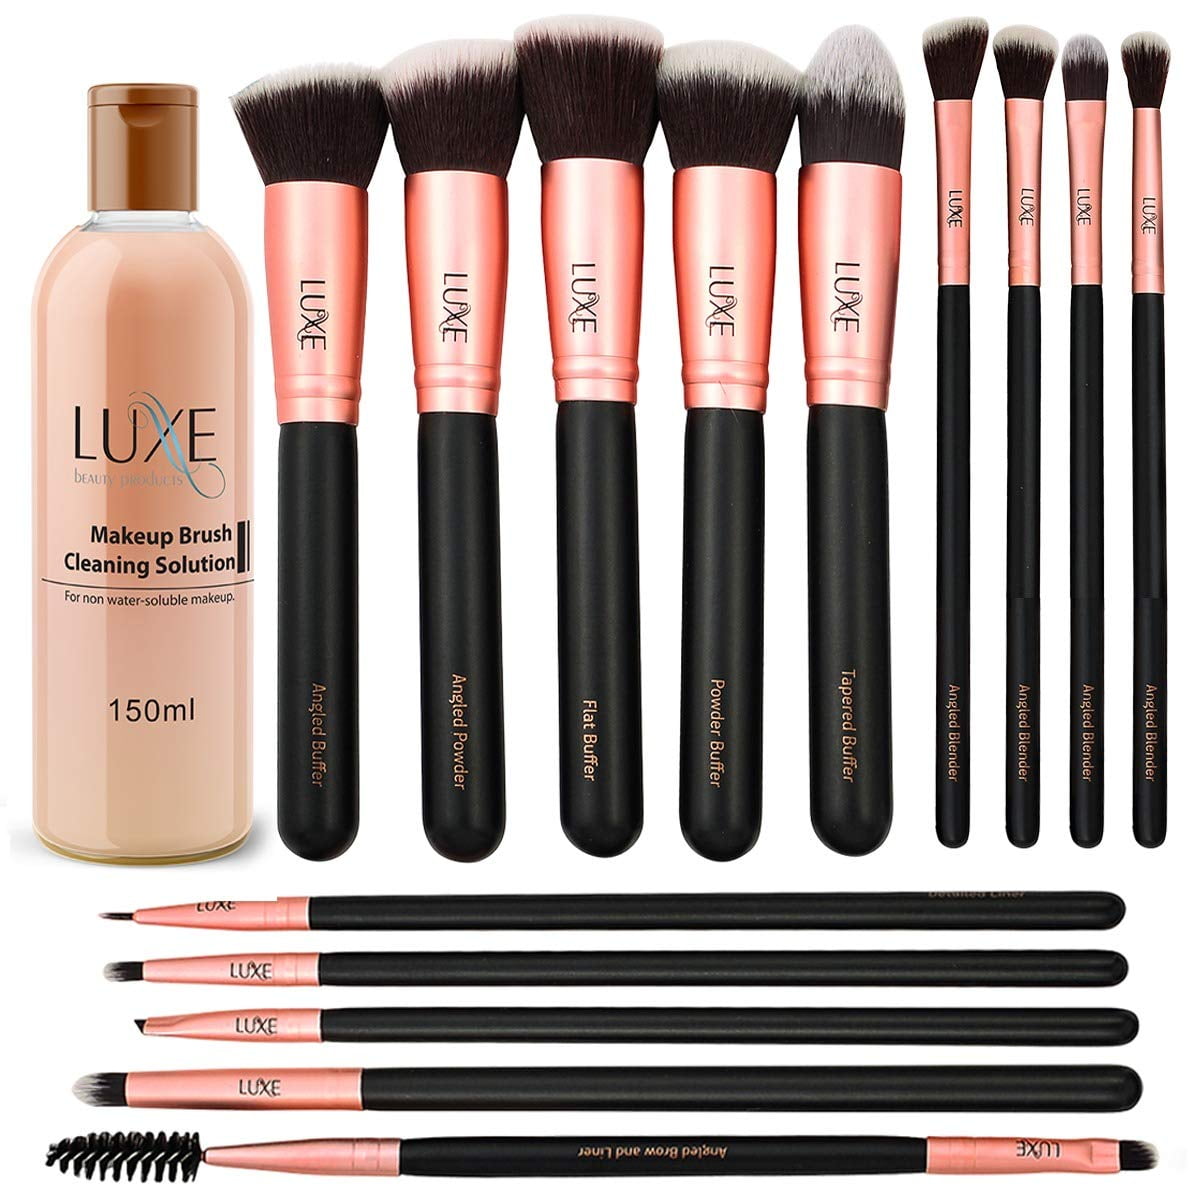 Luxe Premium Makeup Brushes Set with Brush Cleaning Solution - 14 Pc Face Eye, Synthetic Brushes for Foundation, Powder, Blush, and Eyeshadow - Walmart.com